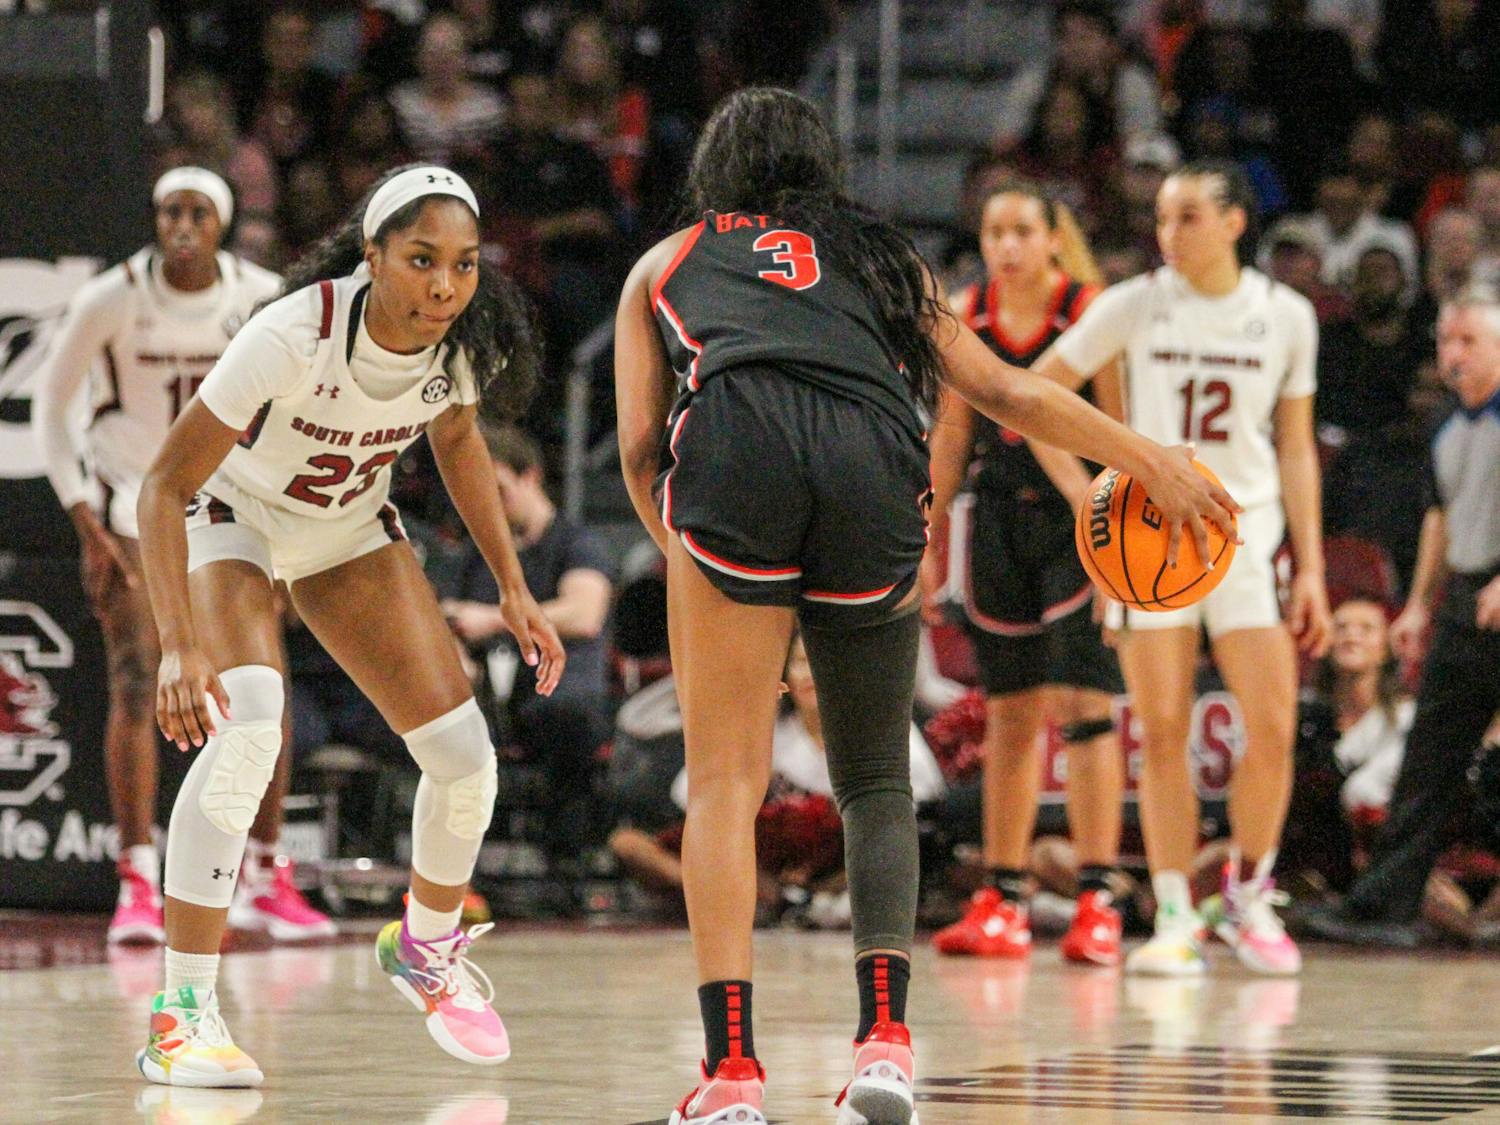 Sophomore guard Bree Hall guards Georgia’s fifth-year guard Diamond Battles during South Carolina’s game against Georgia at Colonial Life Arena on Feb. 26, 2023. The Gamecocks beat the Bulldogs 73-63.